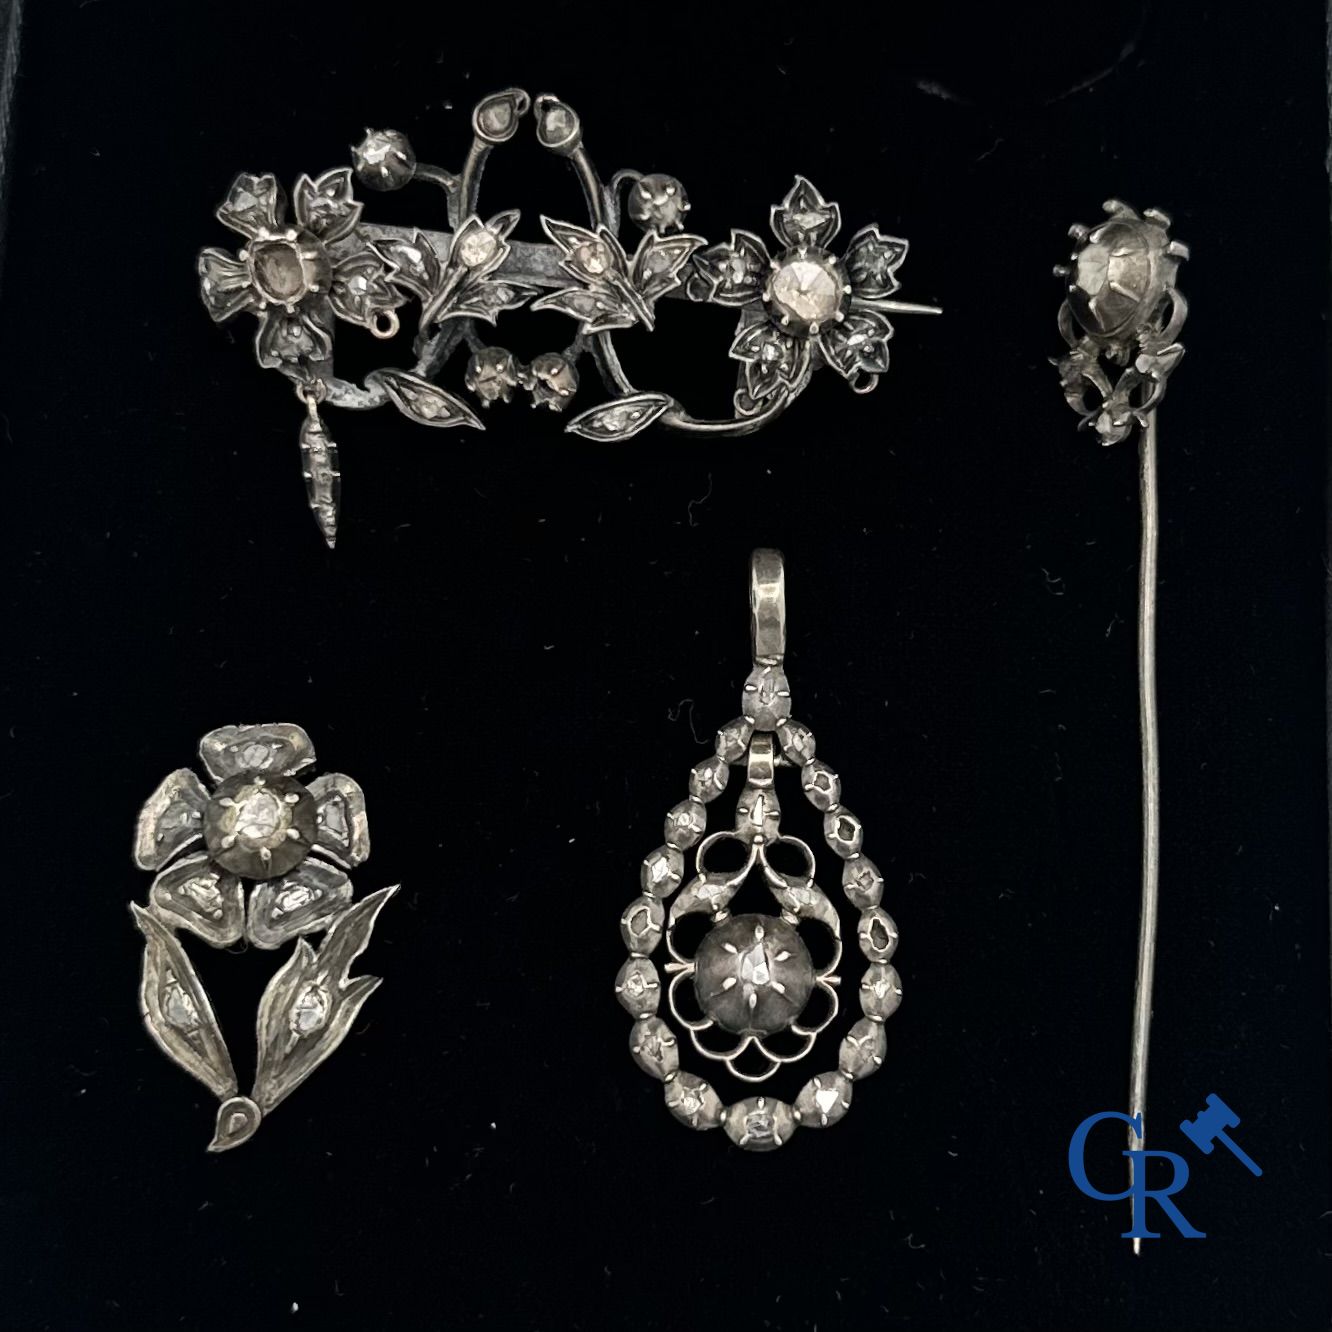 Jewellery: Lot of old jewellery in silver and diamonds.